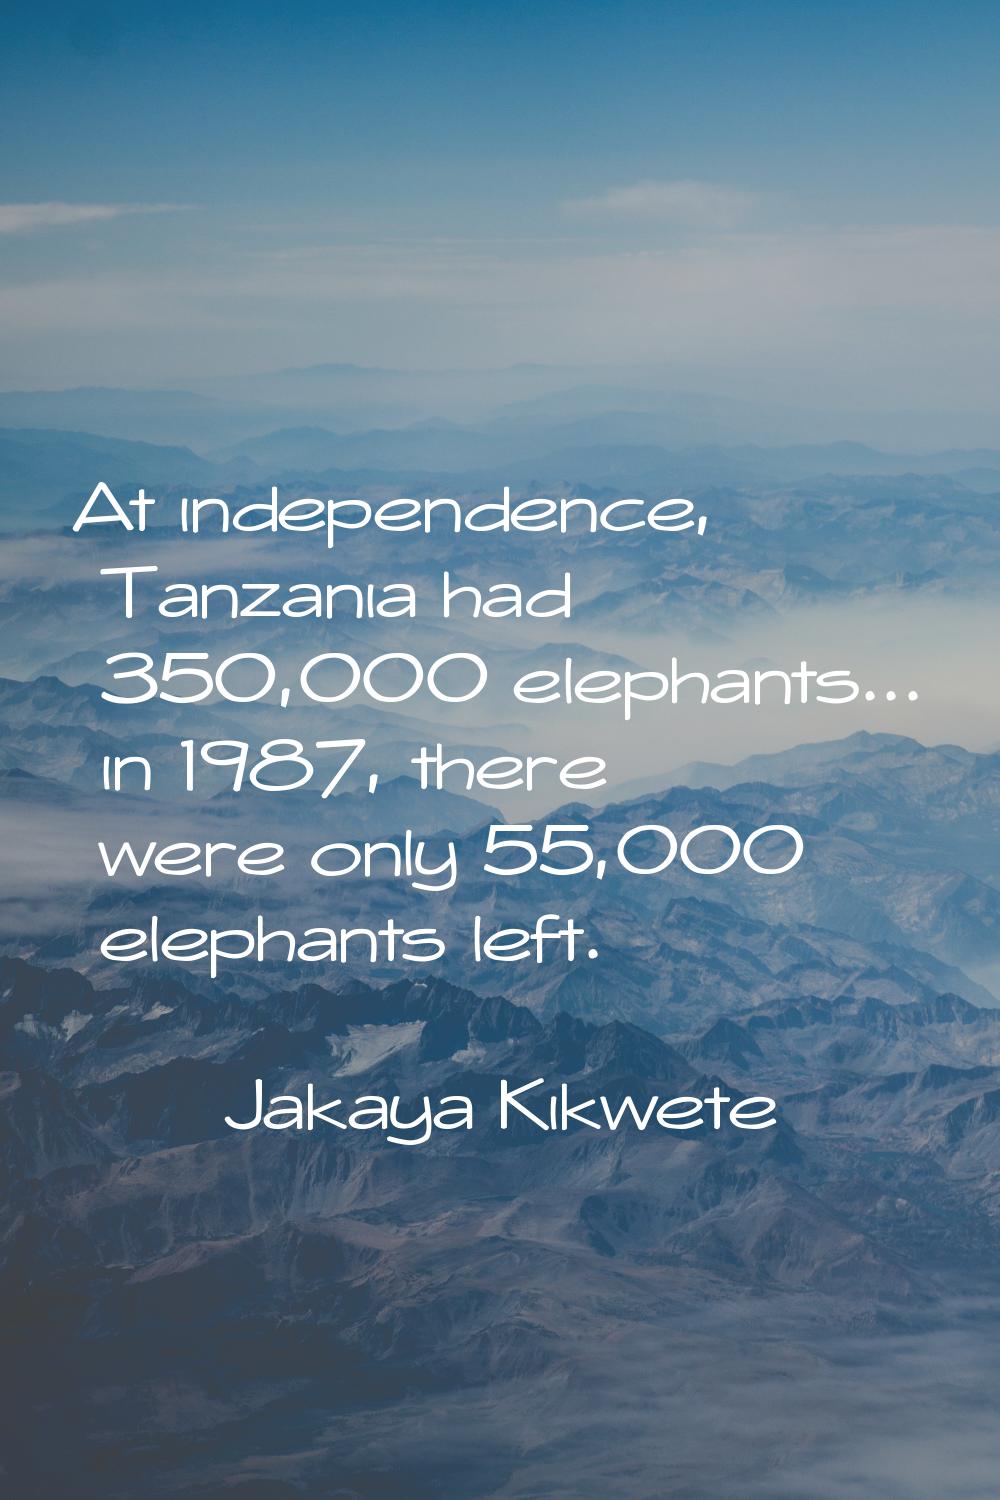 At independence, Tanzania had 350,000 elephants... in 1987, there were only 55,000 elephants left.